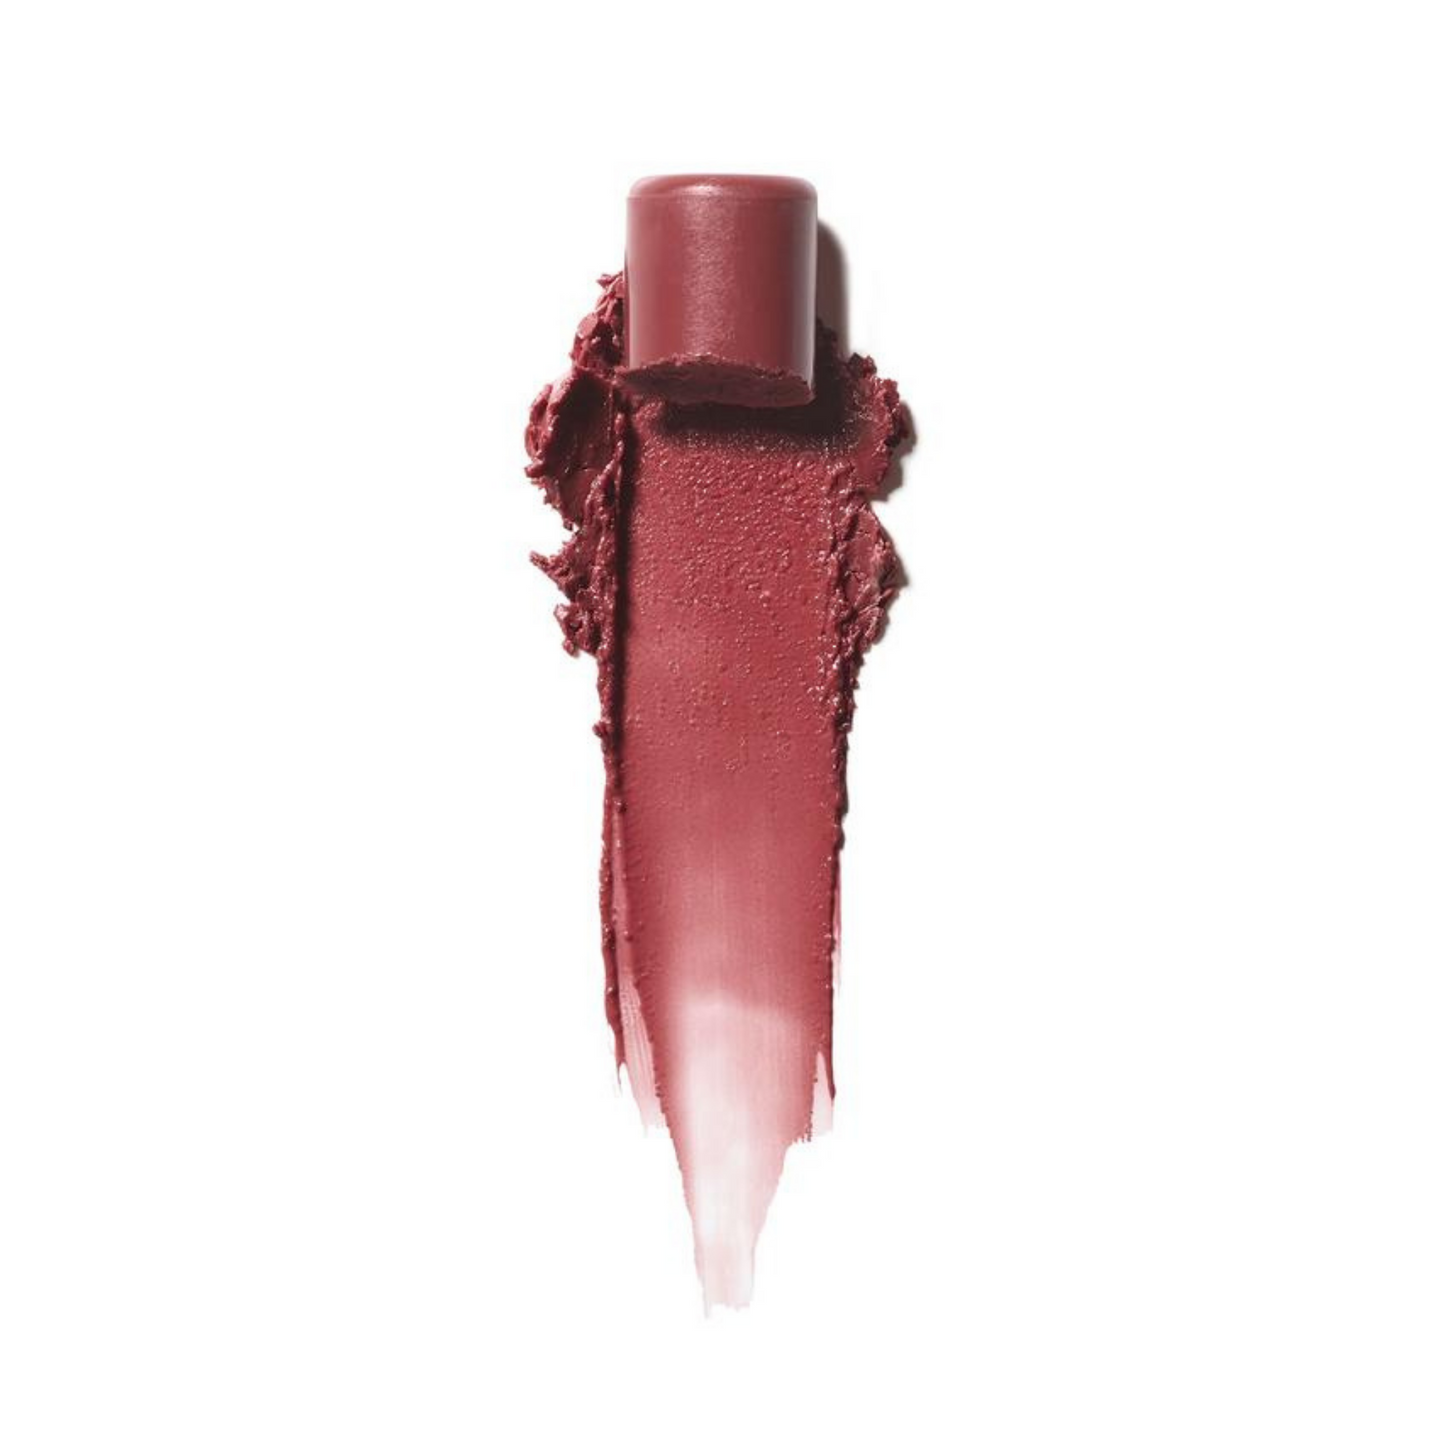 Primary image of Runaway Tinted Lip Balm Swatch